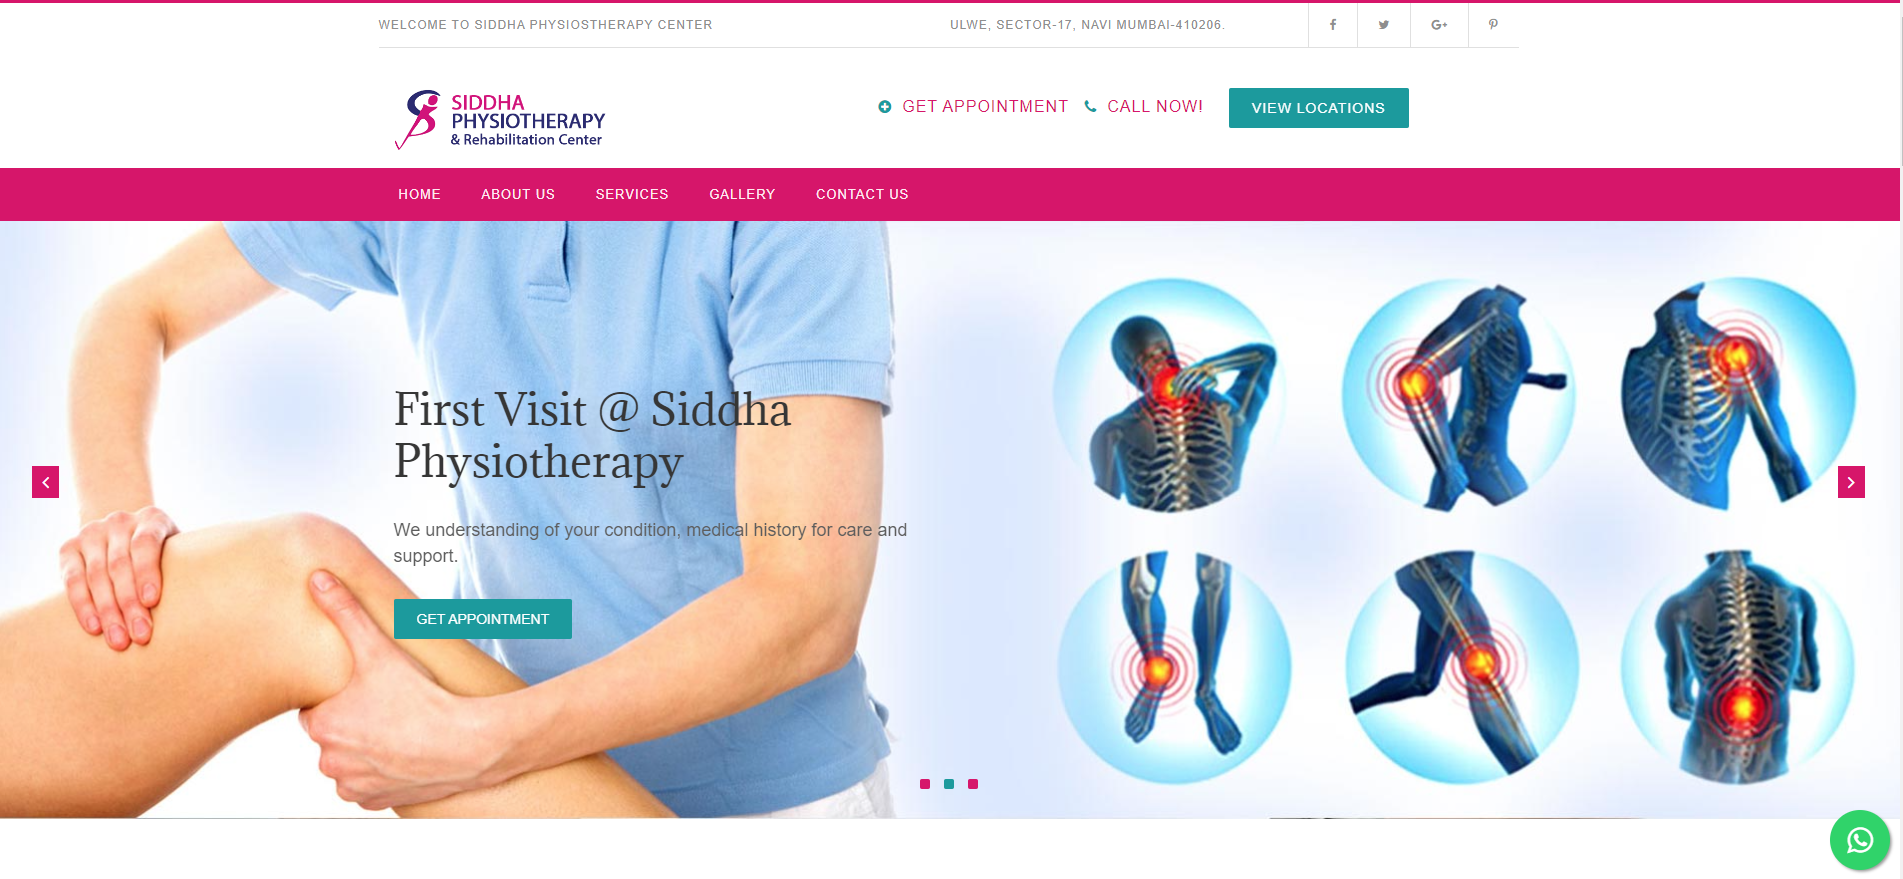 Siddha Physiotherapy